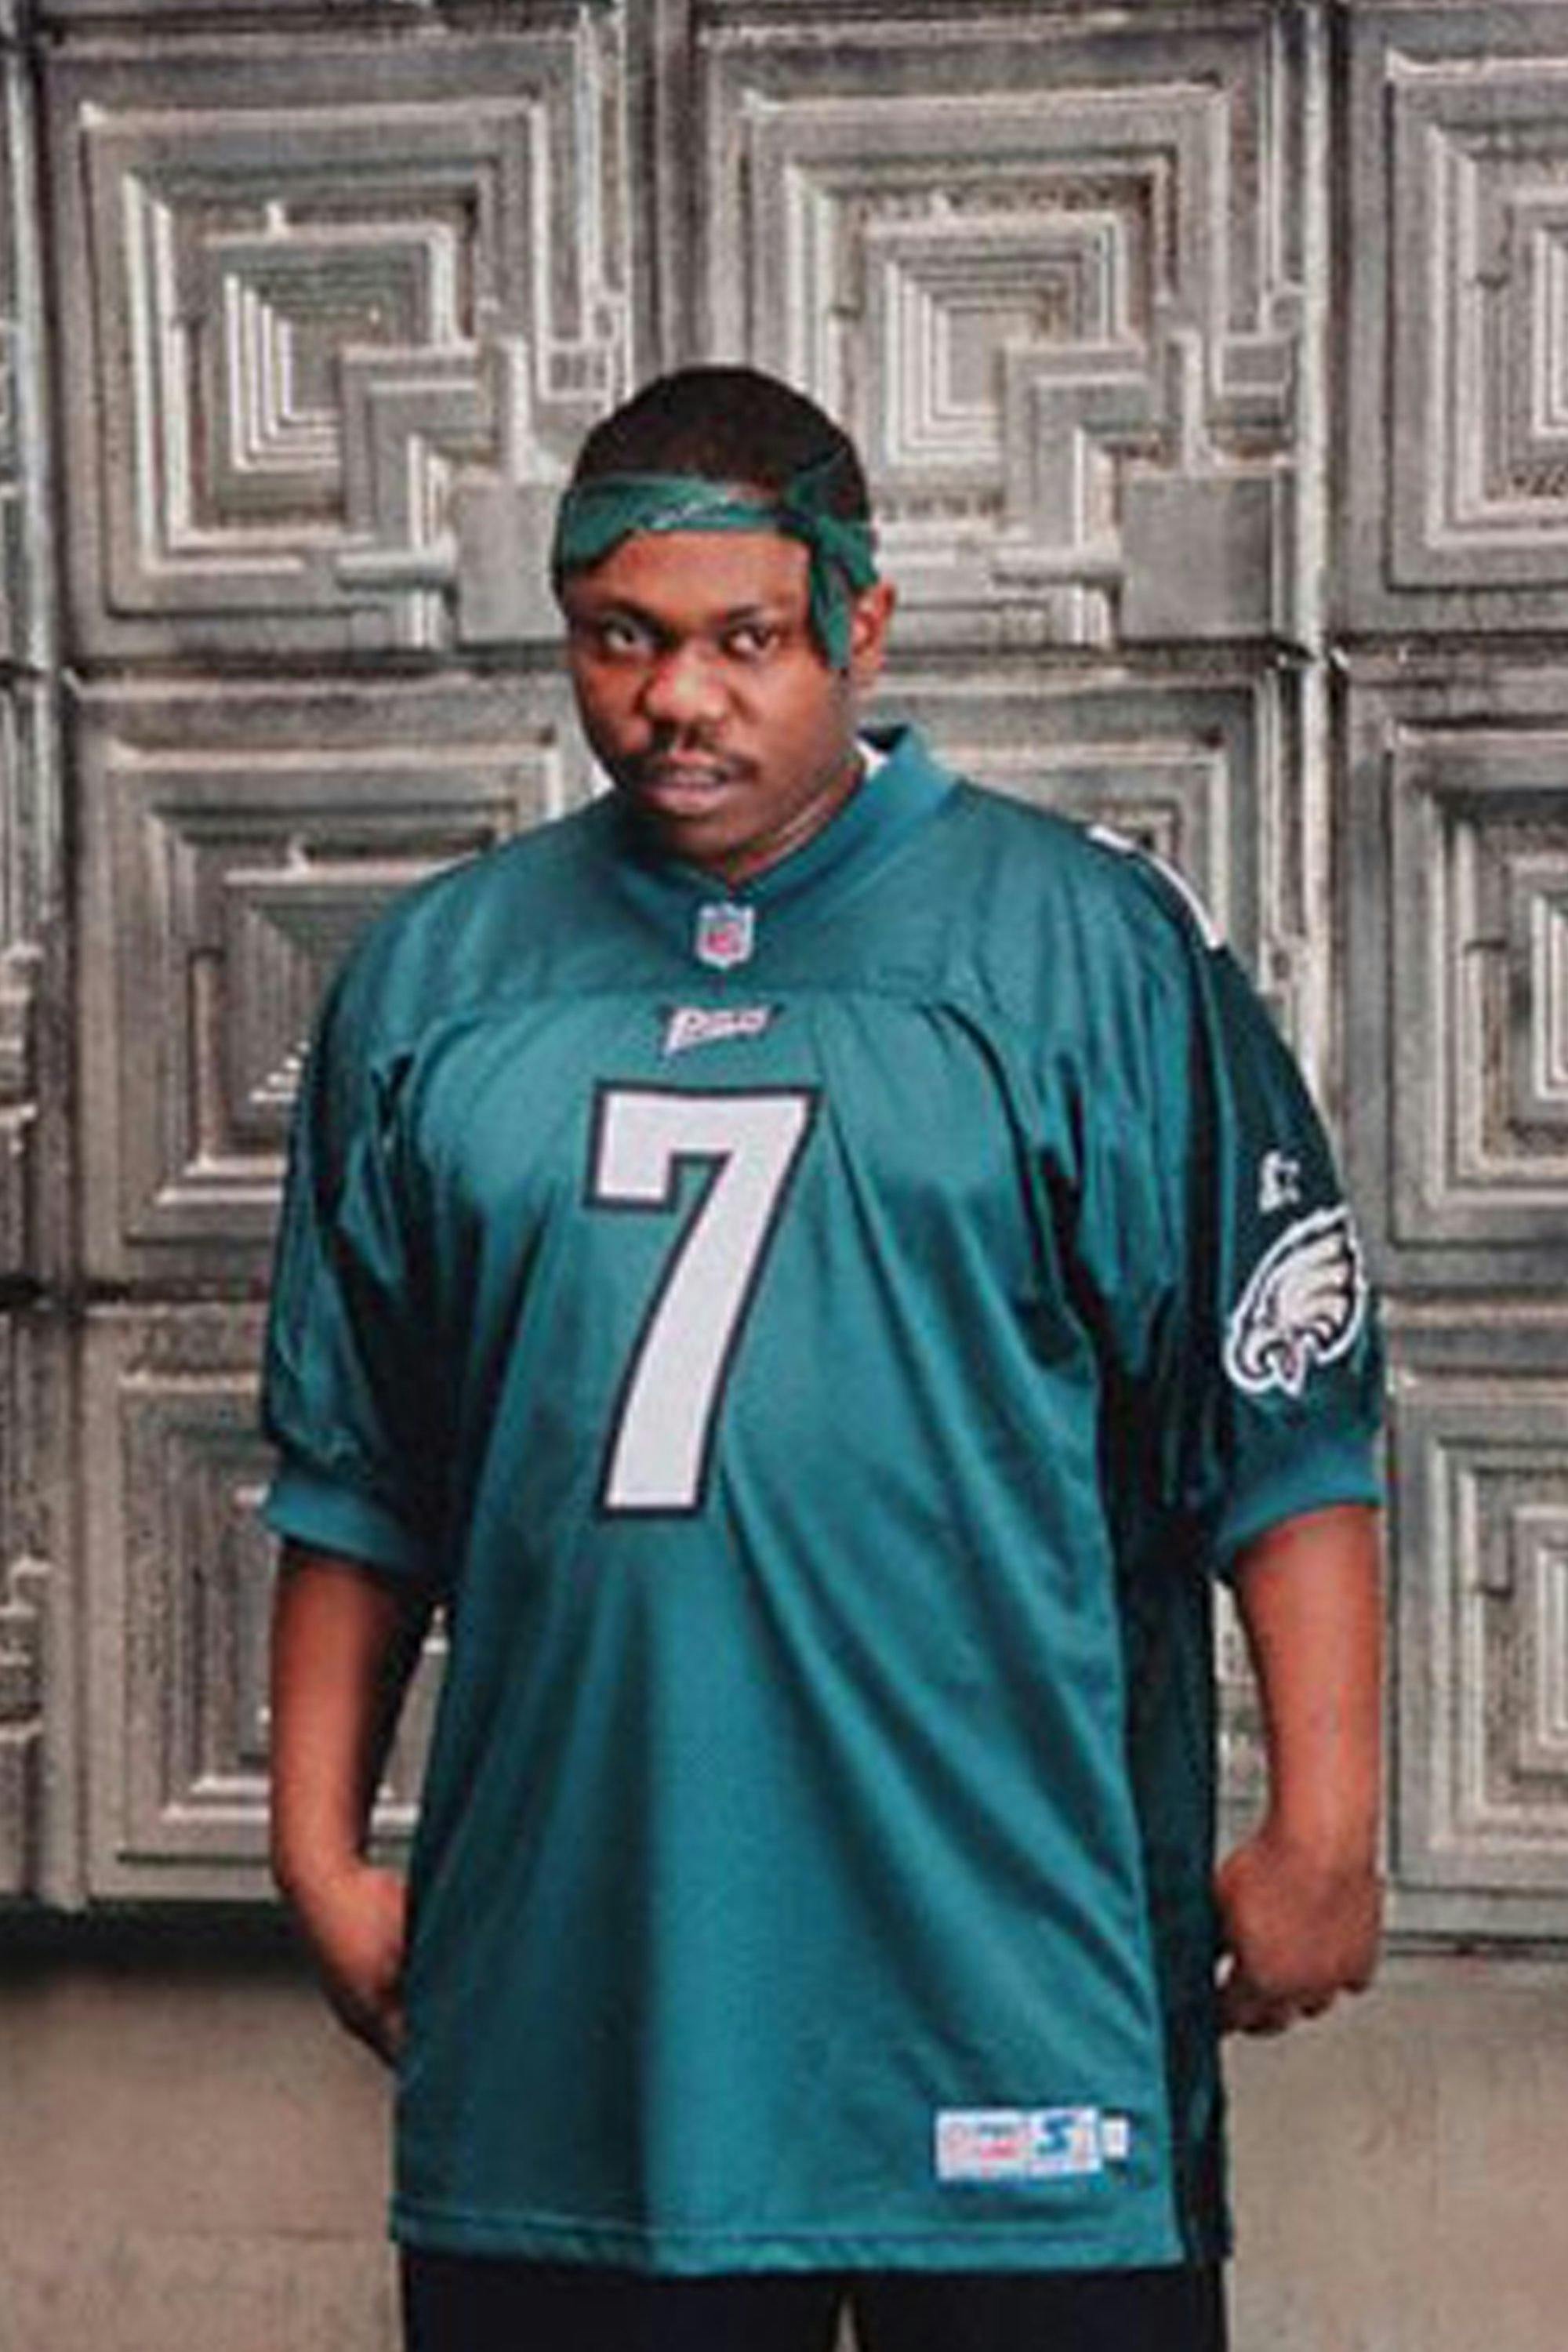 Hey rappers: bring back the jerseys